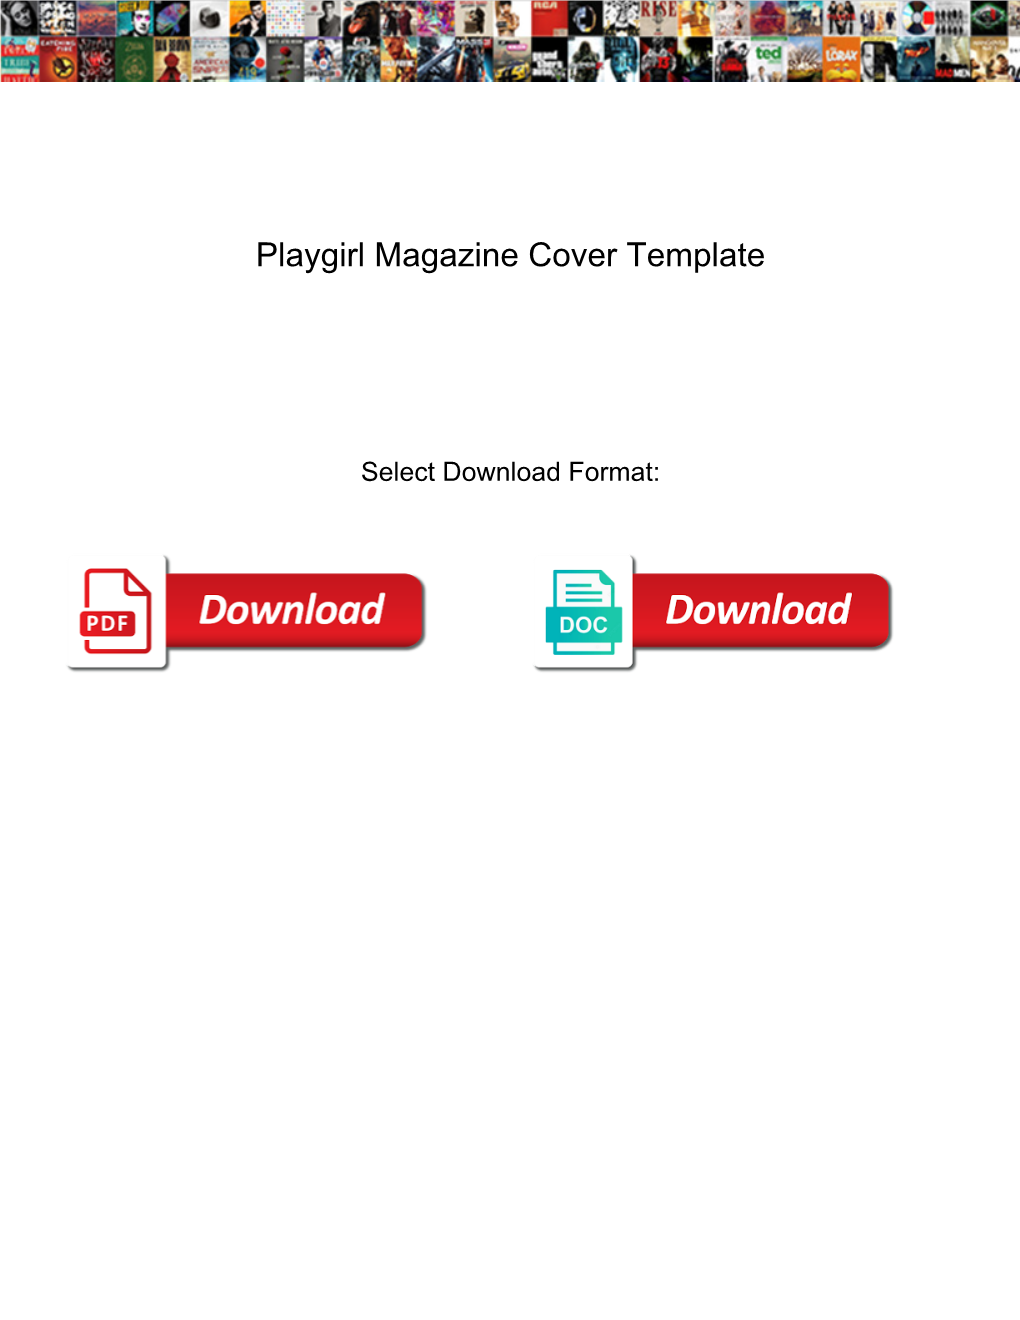 Playgirl Magazine Cover Template DocsLib